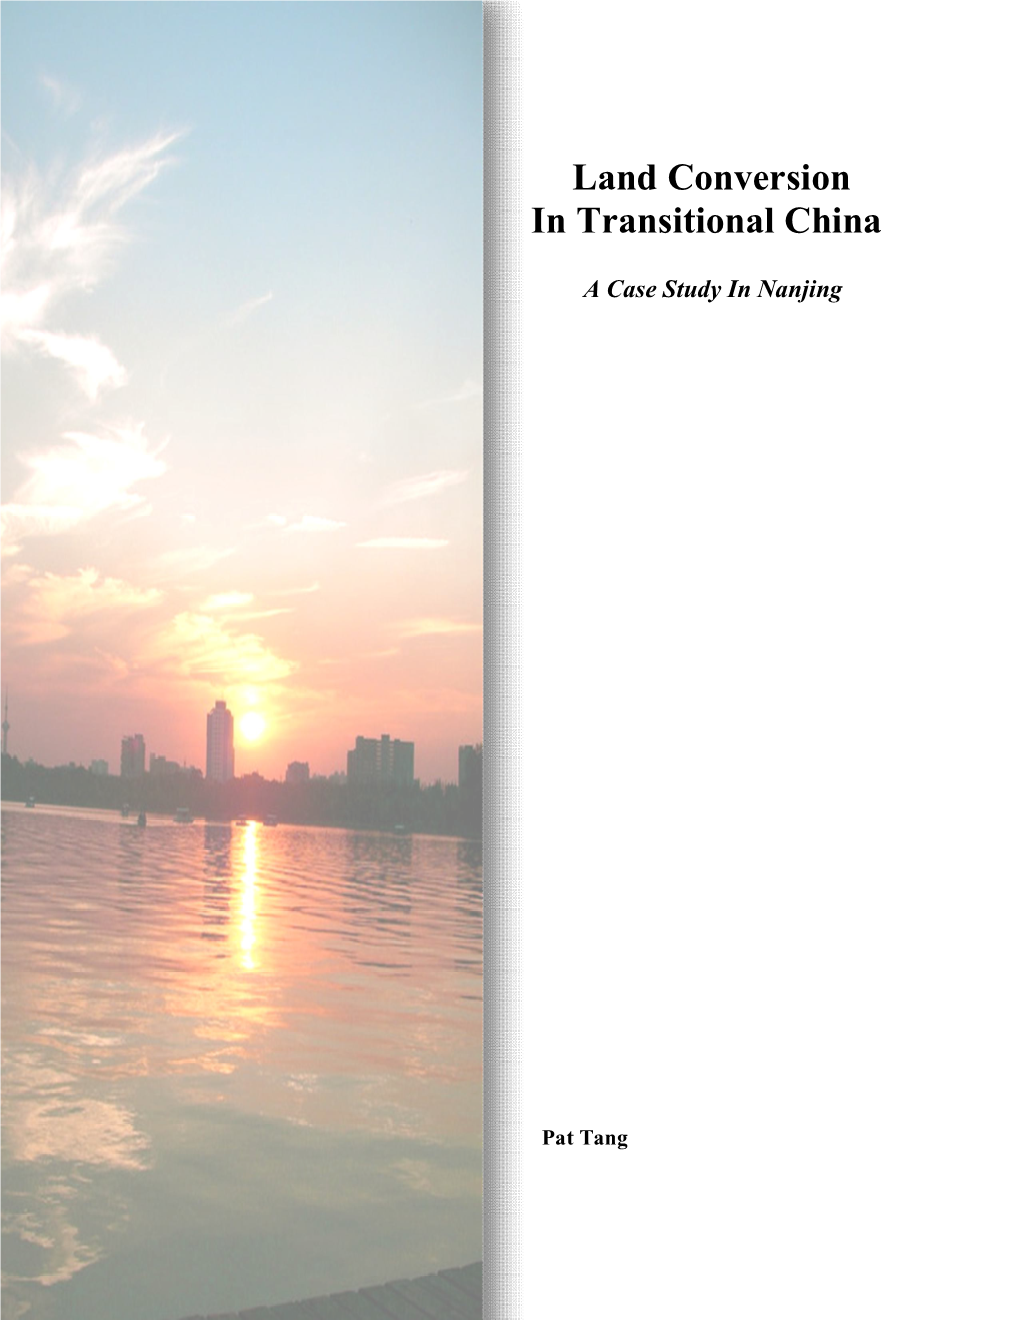 Land Conversion in Transitional China